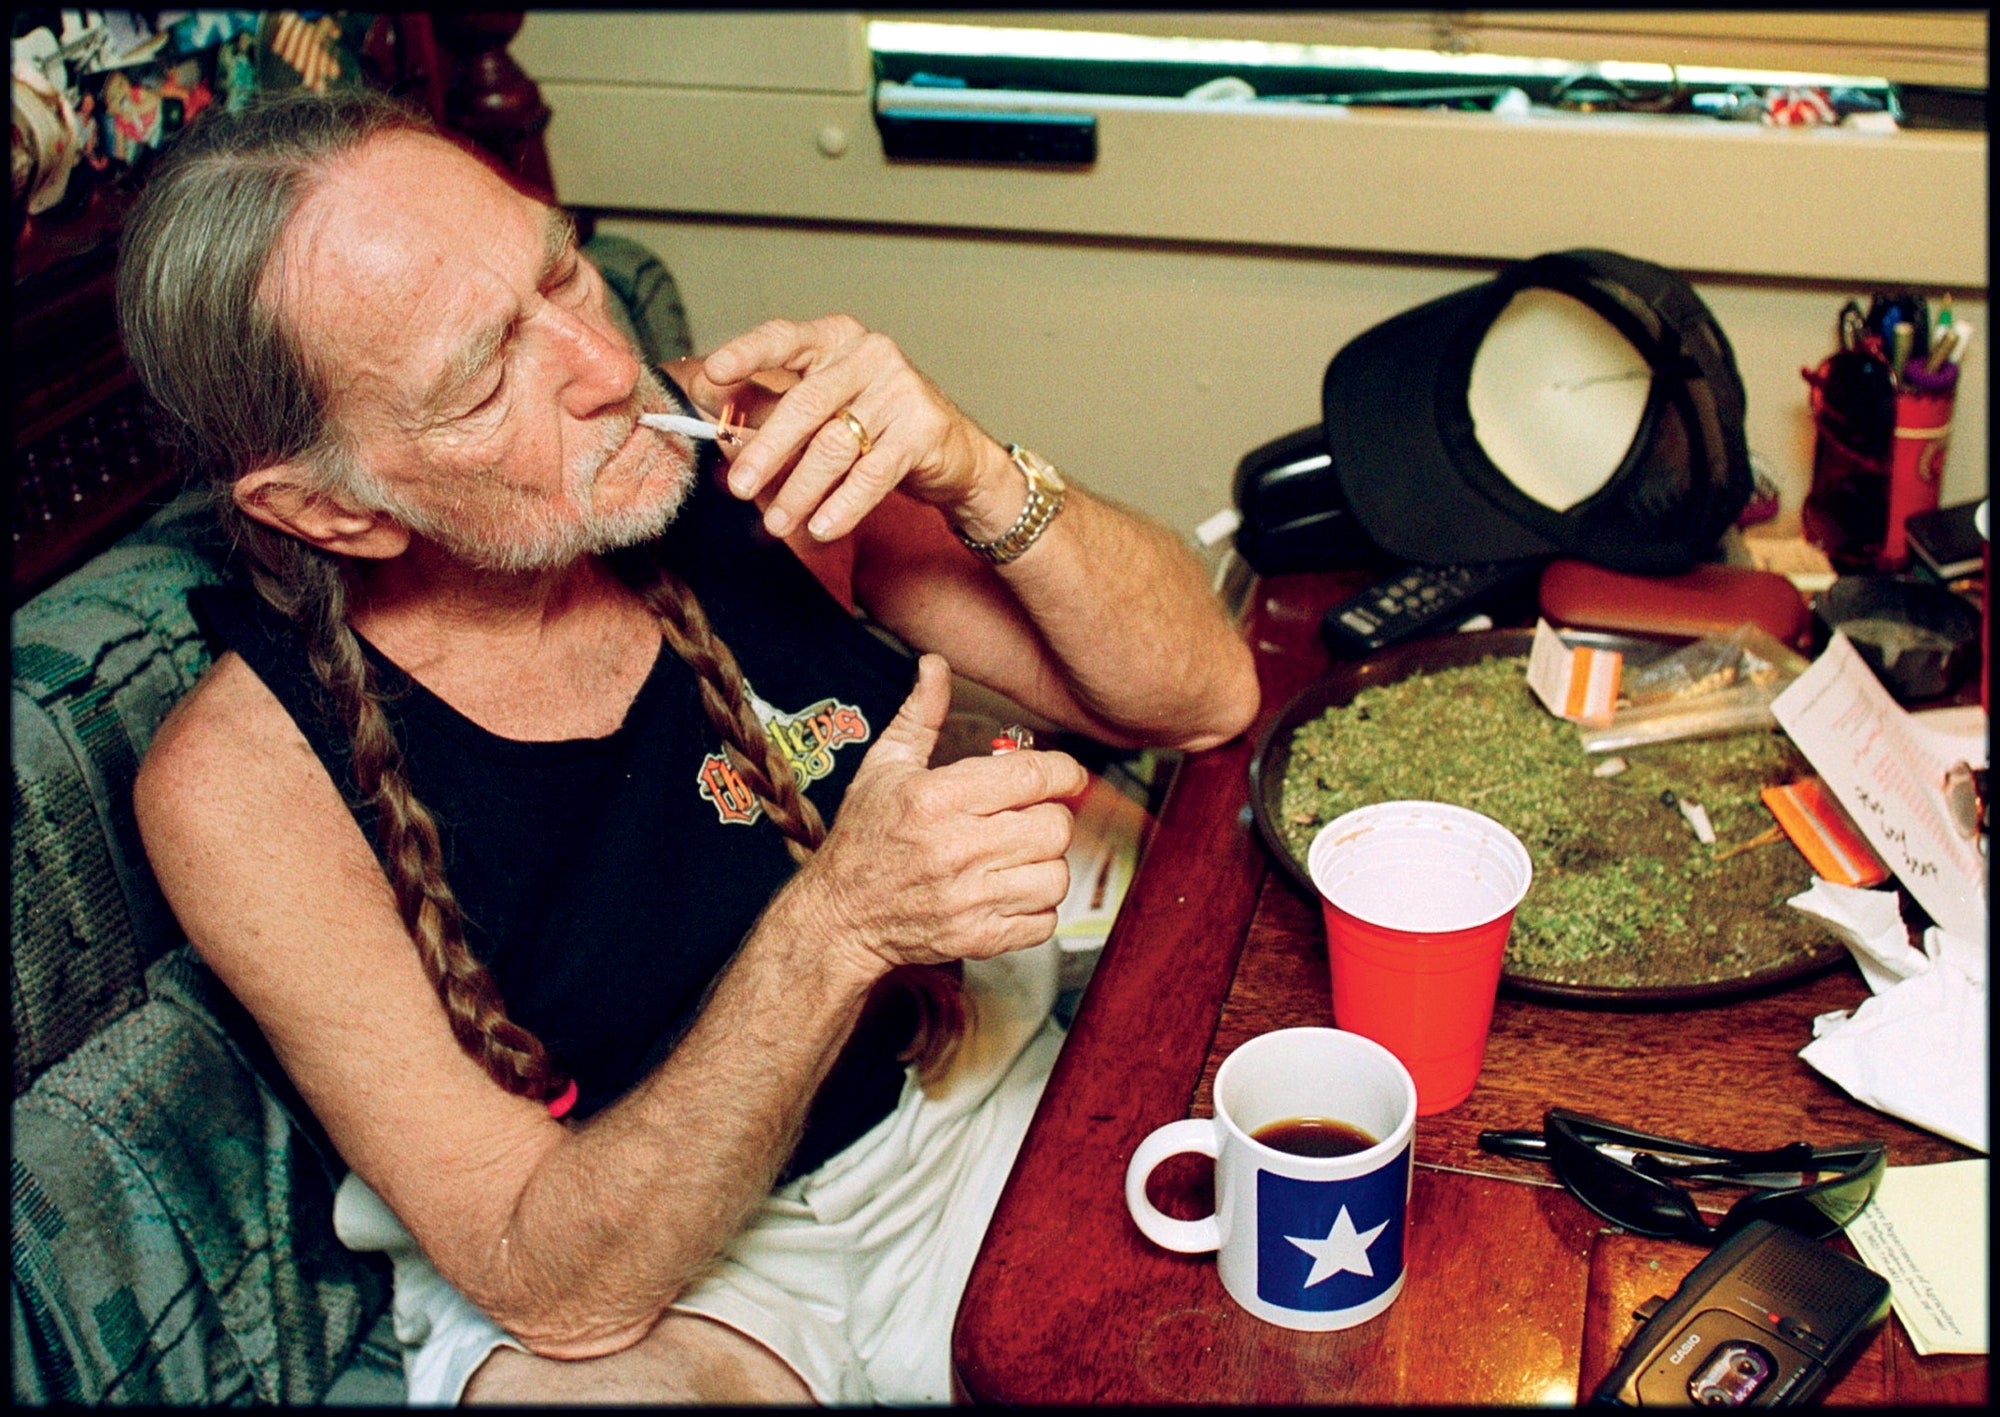 Clio Cannabis To Award Willie Nelson, Additional Honorees For Cannabis Advocacy